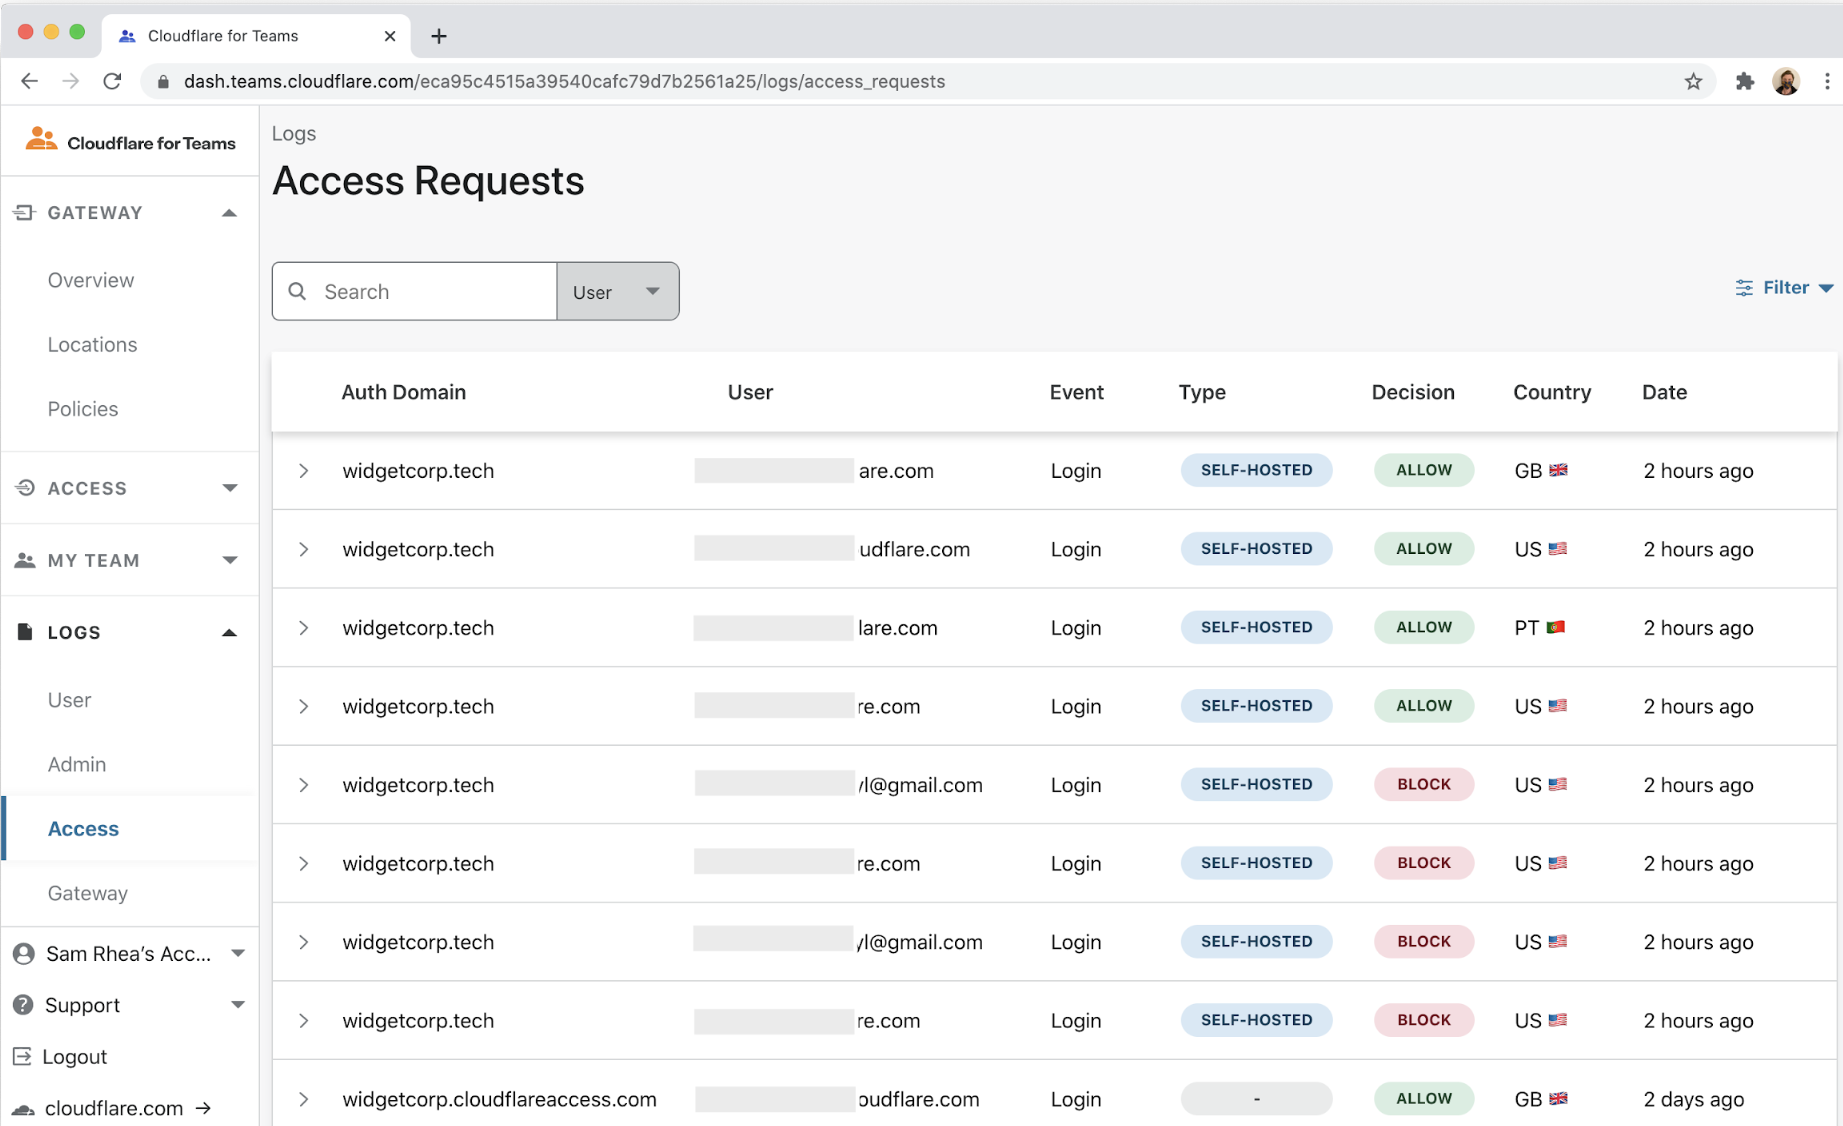 Announcing Workplace Records for Cloudflare for Teams